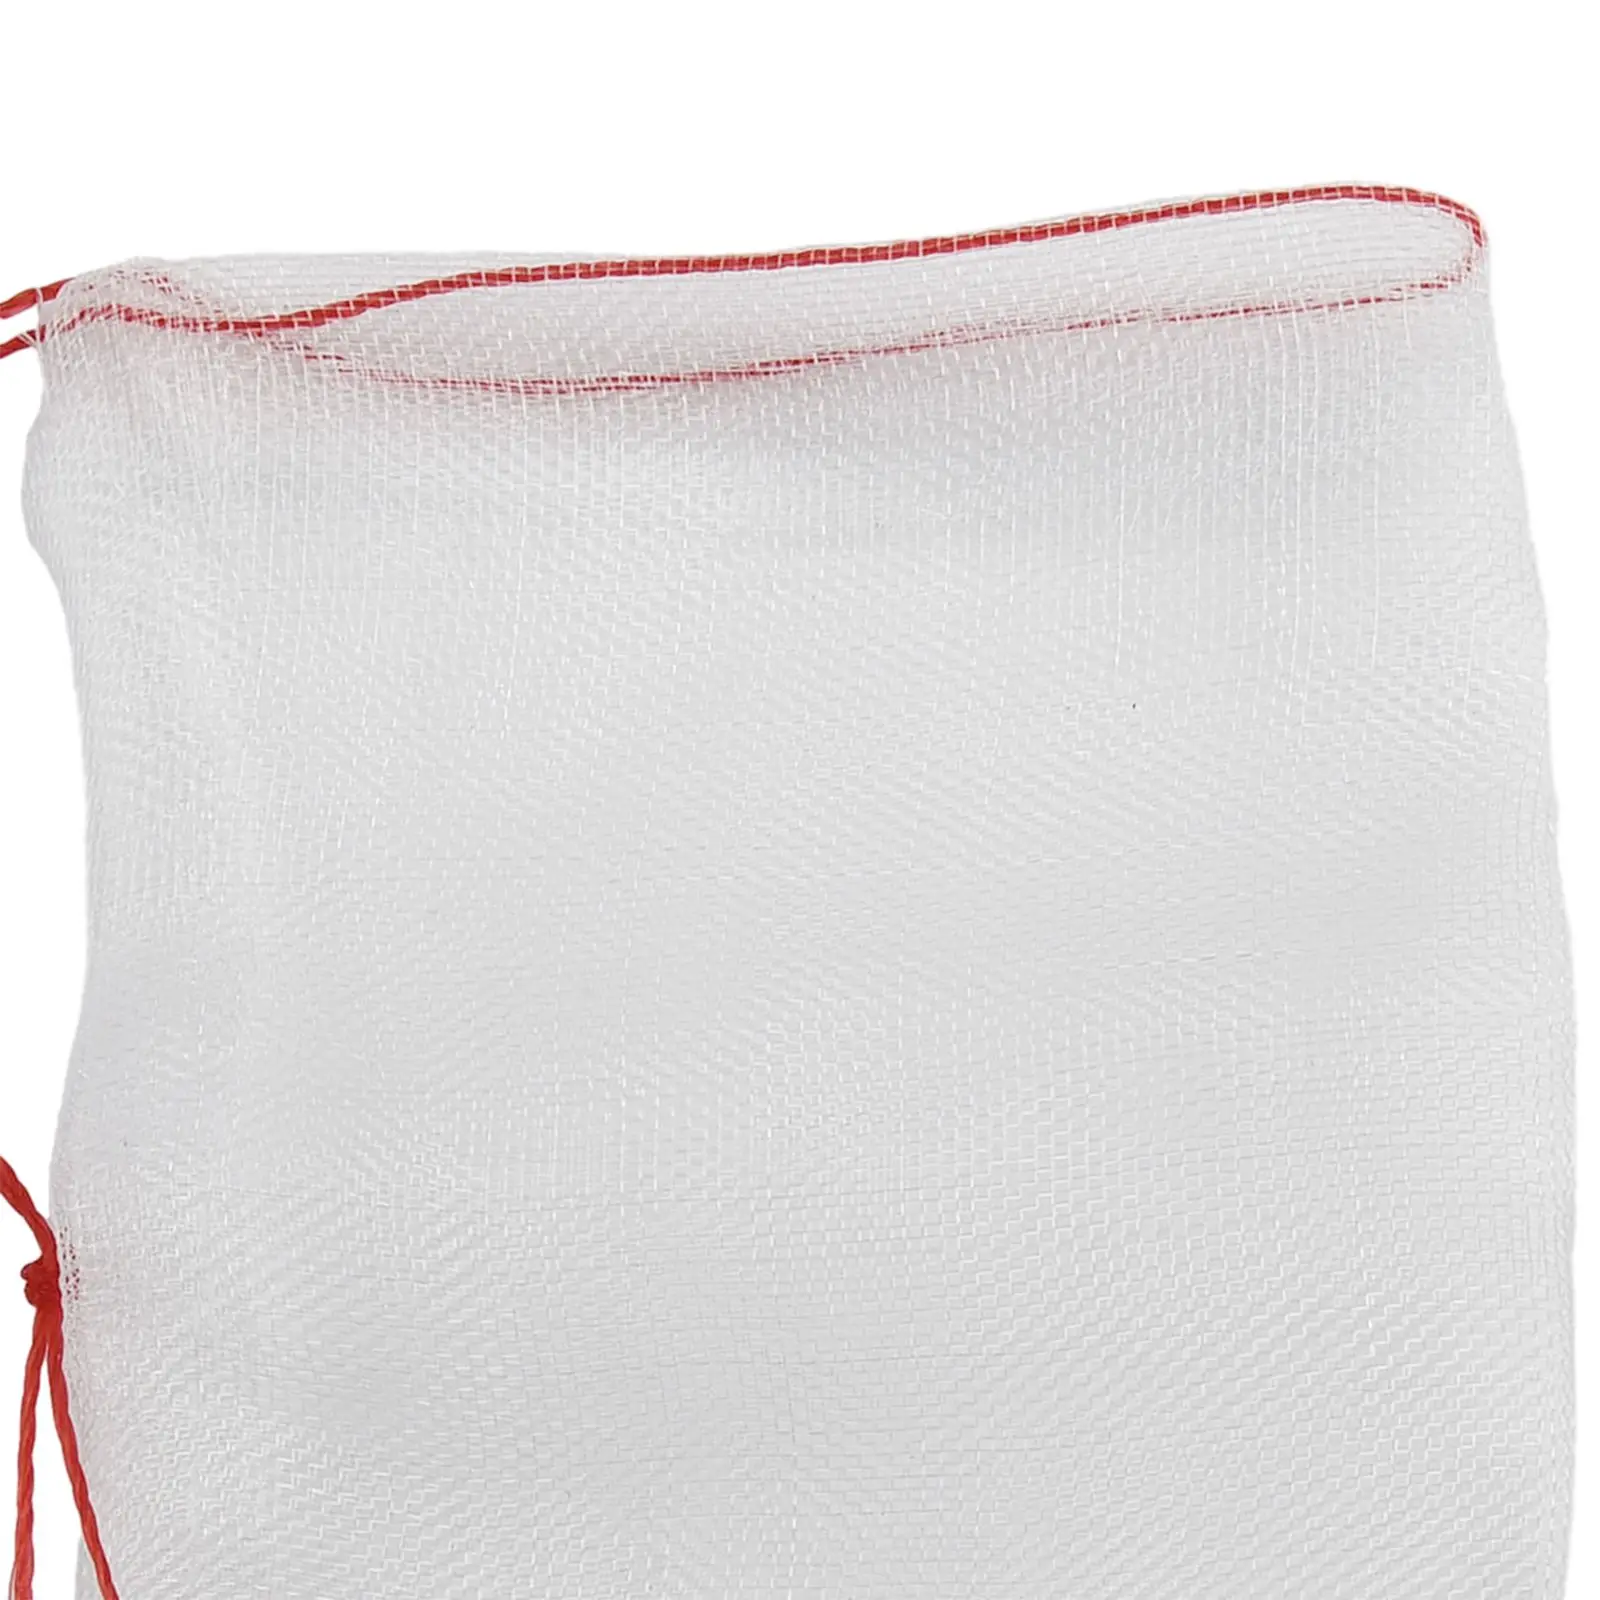 

1 Pcs Fruit Protect Net Plant Mesh Bag Anti Insect Fly Bird Monkey Squirrel For Farm Garden Supplies Greenhouse Tools